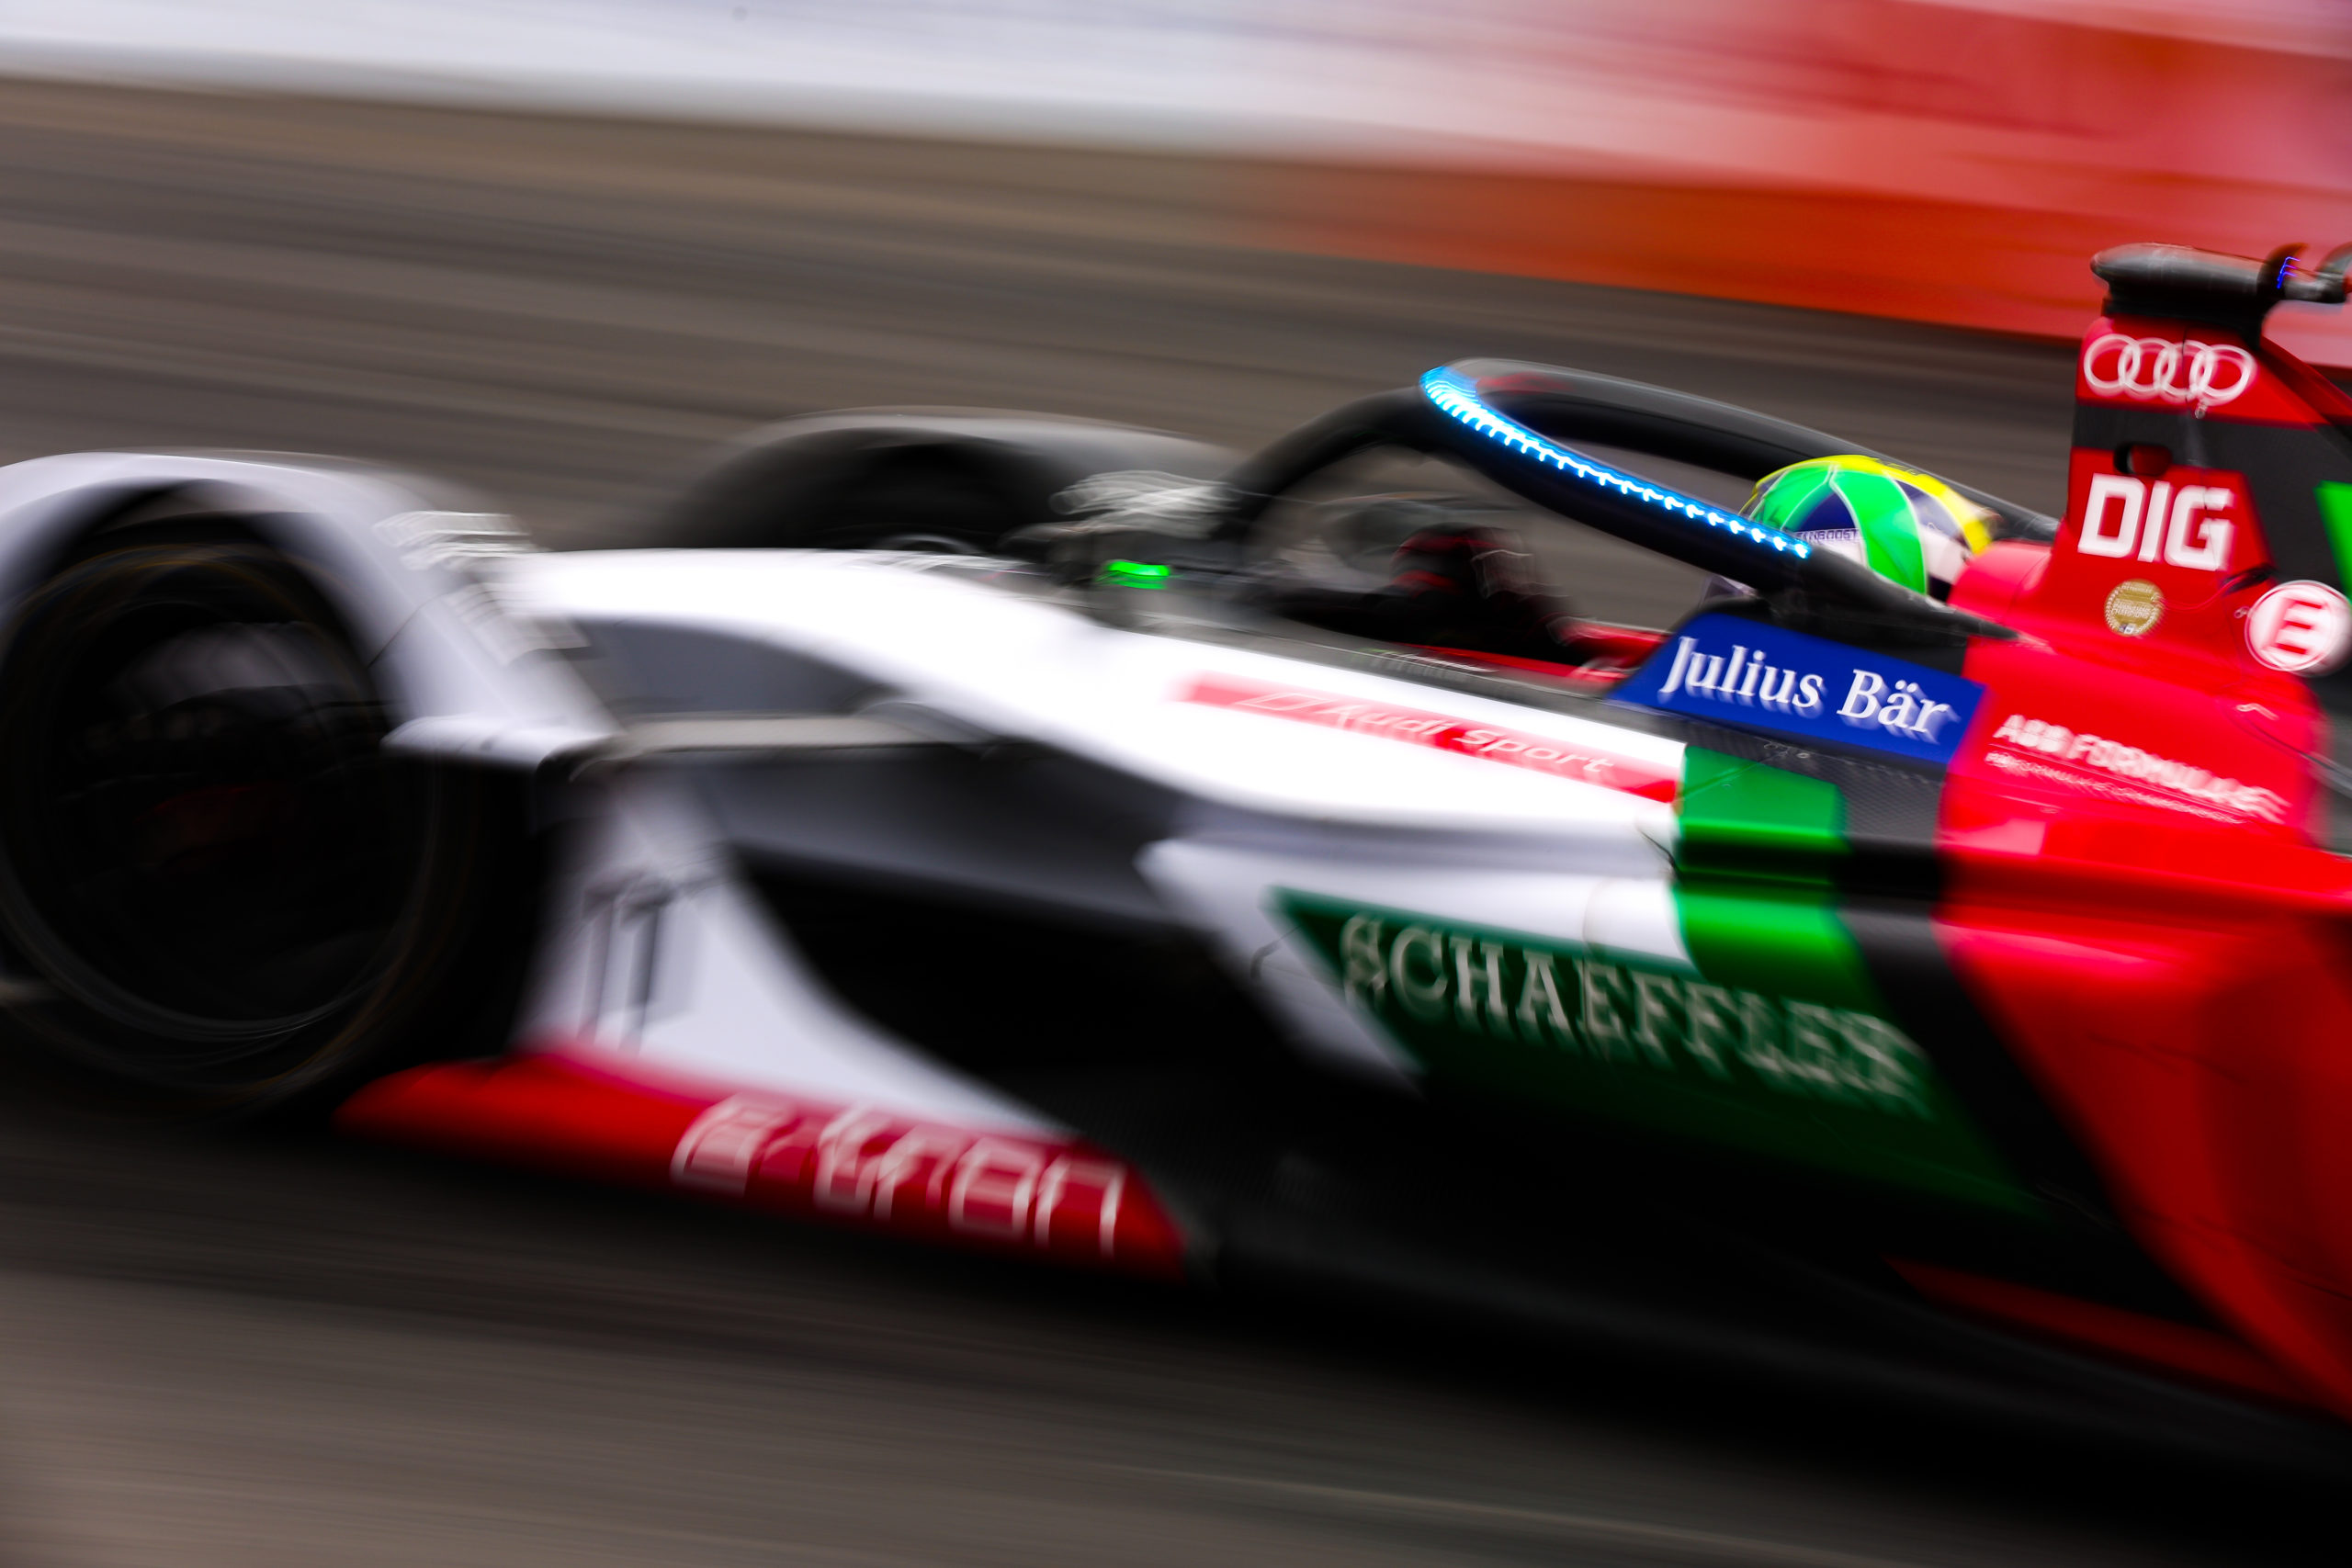 stark reality sets in for a formula e legend in the midfield